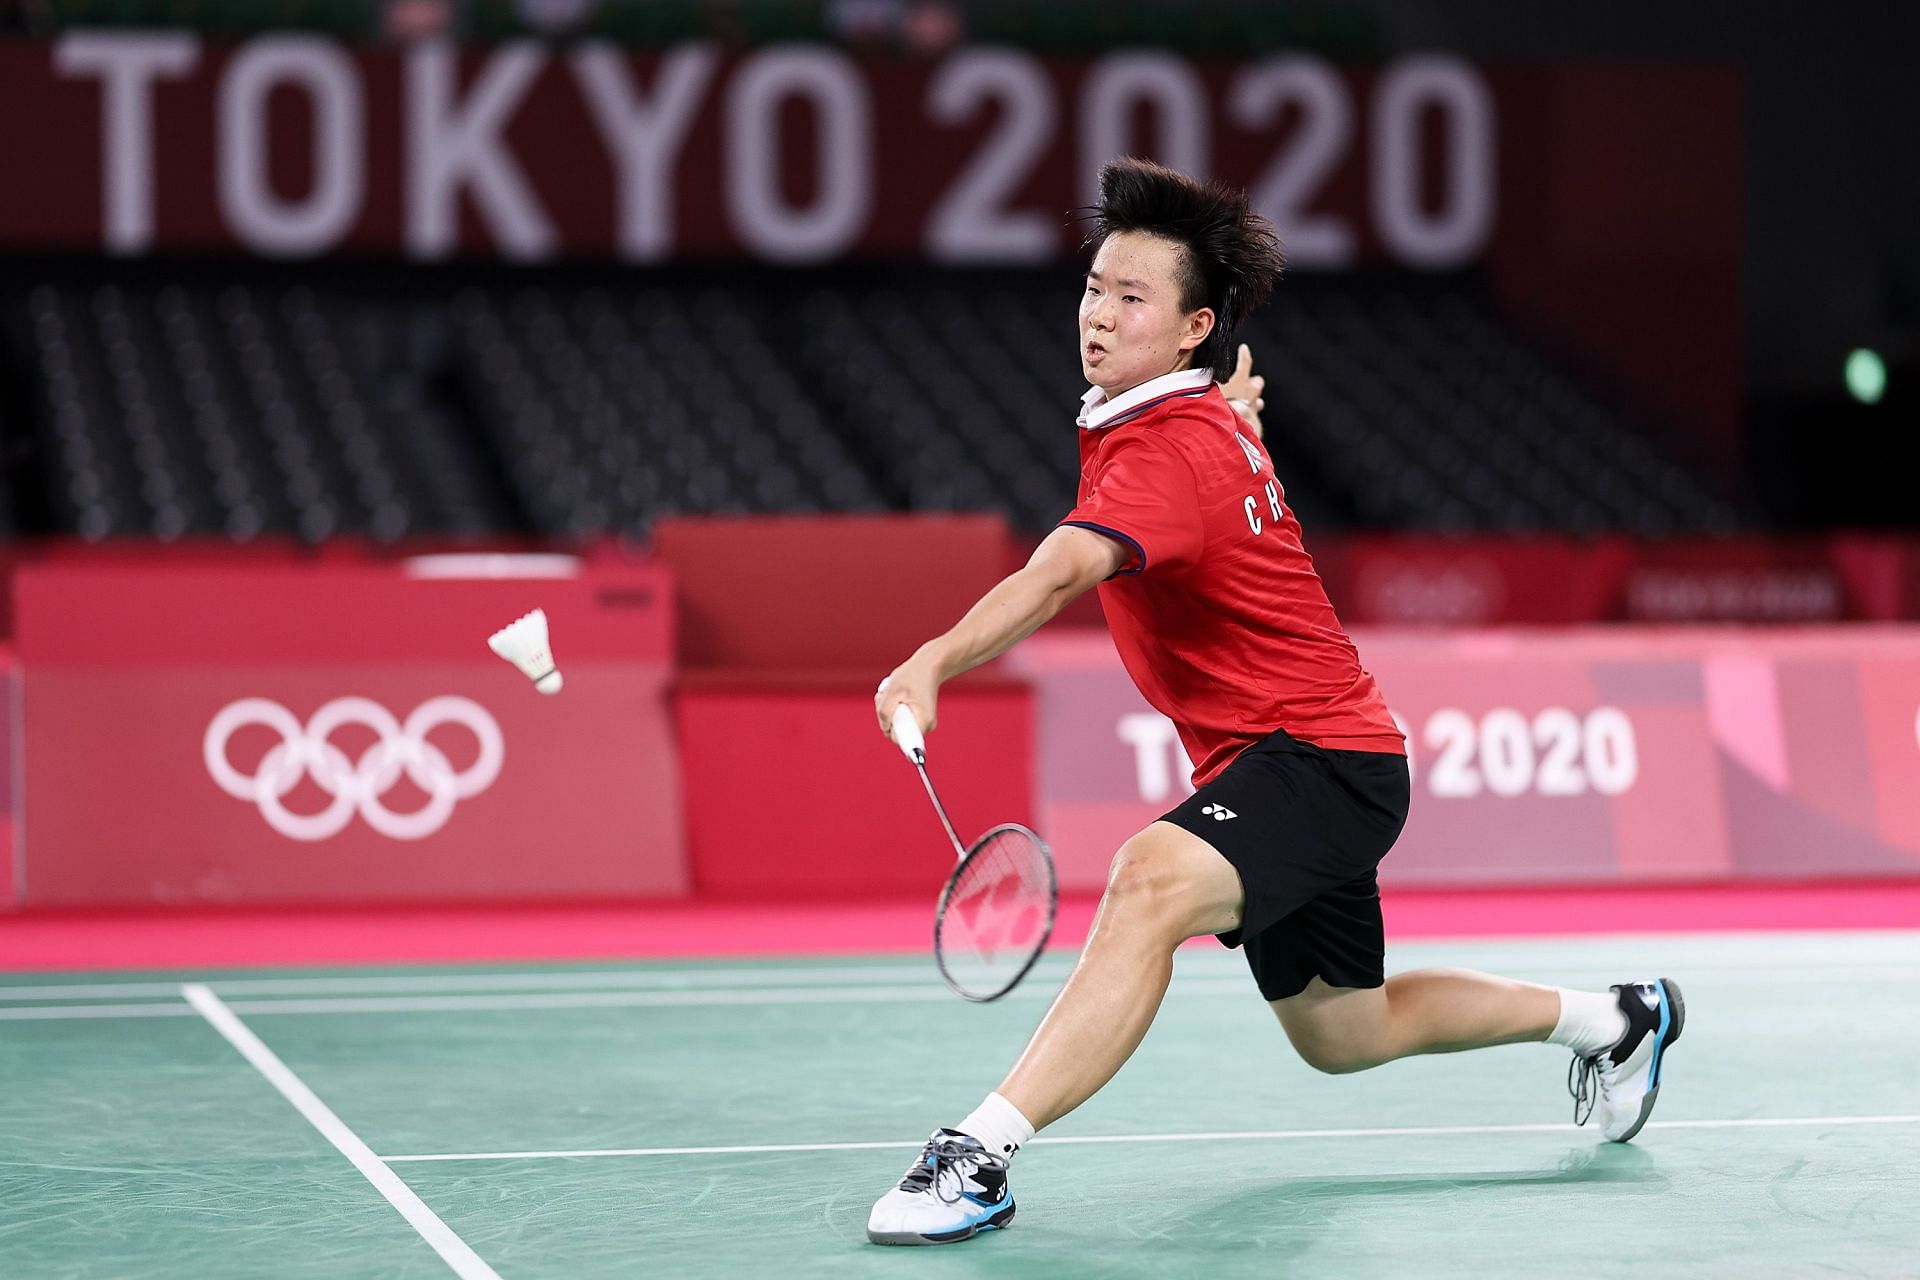 He Bing Jiao in action at the Tokyo Olympics (Image courtesy: Getty Images)